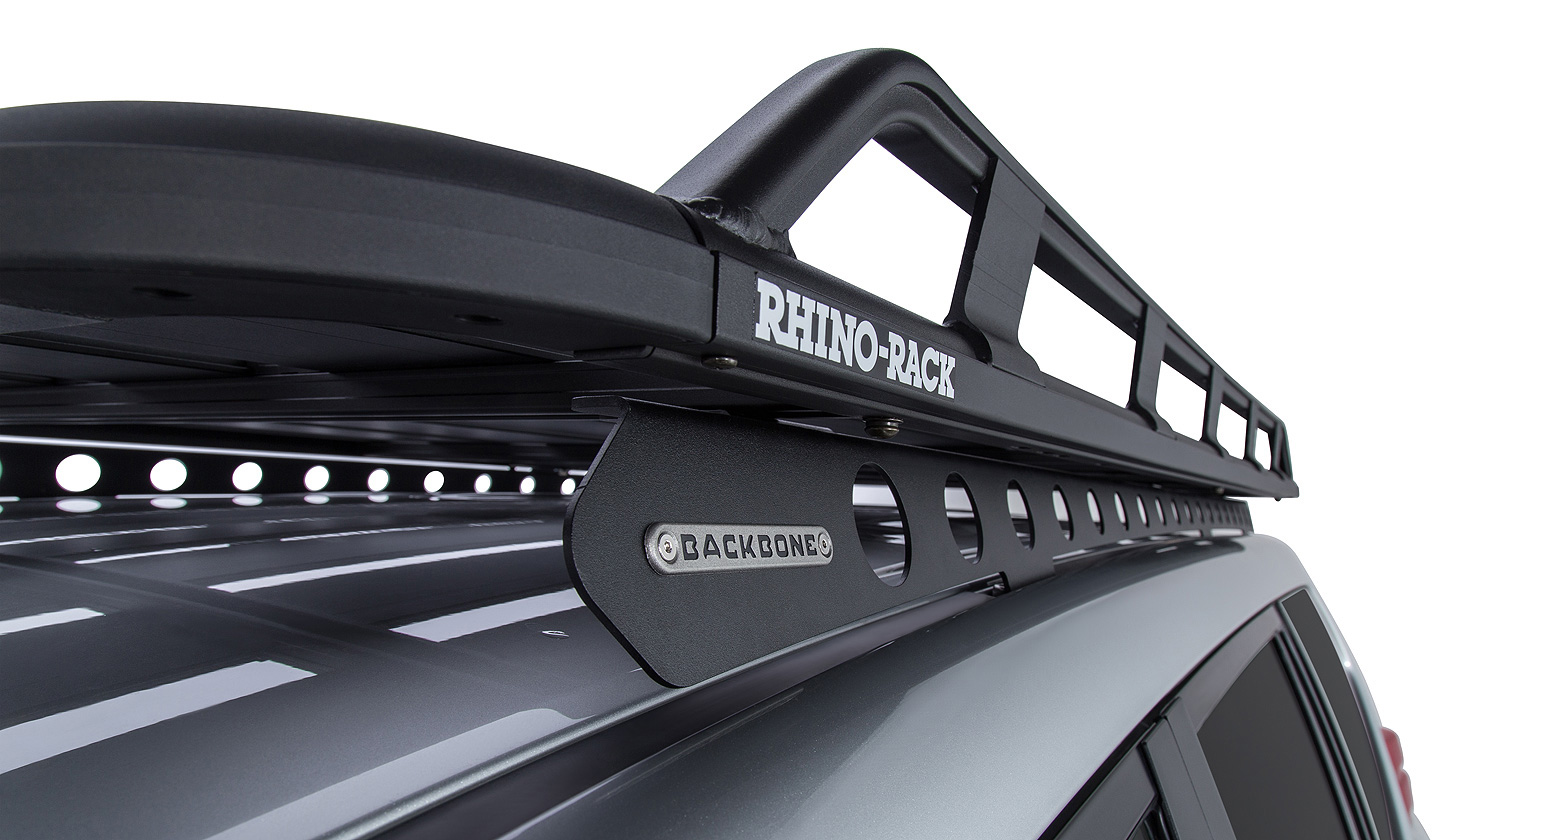 Rhino Rack JA8246 Pioneer Tradie (2128mm x 1236mm) for Toyota Land Cruiser Prado 5dr 150 Series with Bare Roof (2009 onwards) - Factory Point Mount